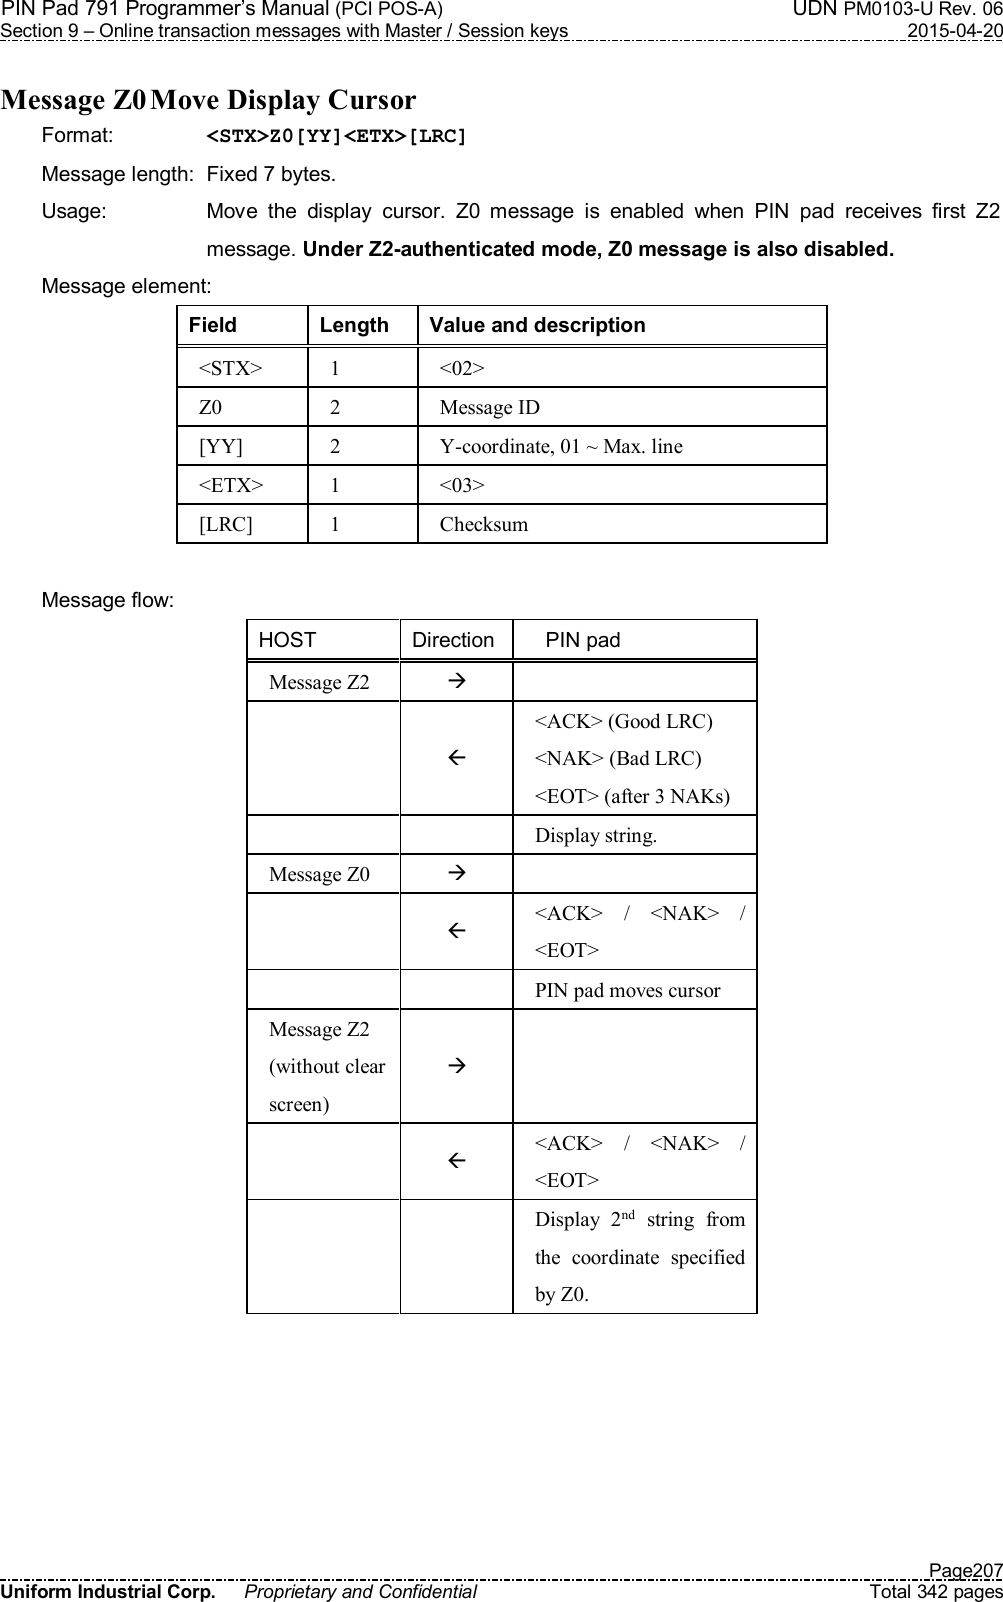 PIN Pad 791 Programmer’s Manual (PCI POS-A)  UDN PM0103-U Rev. 06 Section 9 – Online transaction messages with Master / Session keys  2015-04-20   Page207 Uniform Industrial Corp.  Proprietary and Confidential  Total 342 pages  Message Z0 Move Display Cursor Format:    &lt;STX&gt;Z0[YY]&lt;ETX&gt;[LRC] Message length:  Fixed 7 bytes. Usage:  Move  the  display  cursor.  Z0  message  is  enabled  when  PIN  pad  receives  first  Z2 message. Under Z2-authenticated mode, Z0 message is also disabled. Message element:   Field  Length  Value and description &lt;STX&gt;  1  &lt;02&gt; Z0  2  Message ID [YY]  2  Y-coordinate, 01 ~ Max. line &lt;ETX&gt;  1  &lt;03&gt; [LRC]  1  Checksum  Message flow: HOST  Direction      PIN pad Message Z2      &lt;ACK&gt; (Good LRC) &lt;NAK&gt; (Bad LRC) &lt;EOT&gt; (after 3 NAKs)     Display string. Message Z0      &lt;ACK&gt;  /  &lt;NAK&gt;  / &lt;EOT&gt;       PIN pad moves cursor Message Z2 (without clear screen)     &lt;ACK&gt;  /  &lt;NAK&gt;  / &lt;EOT&gt;     Display  2nd  string  from the  coordinate  specified by Z0.  